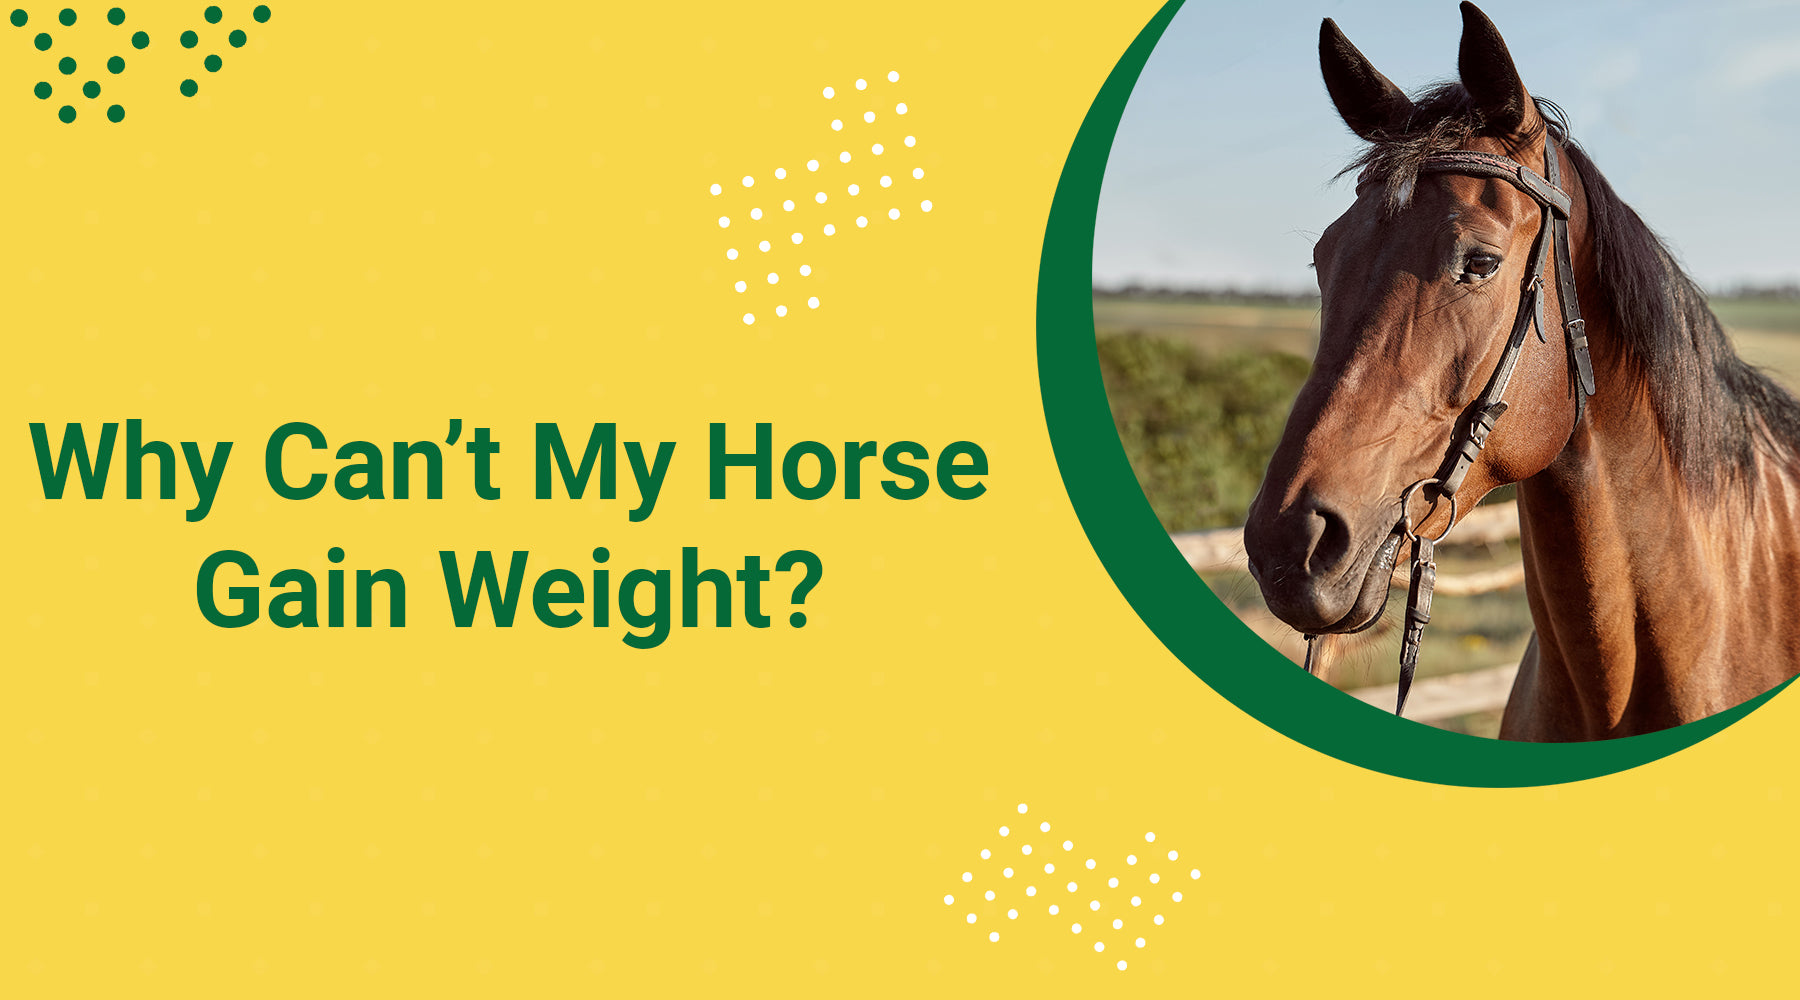 Why Can’t My Horse Gain Weight?